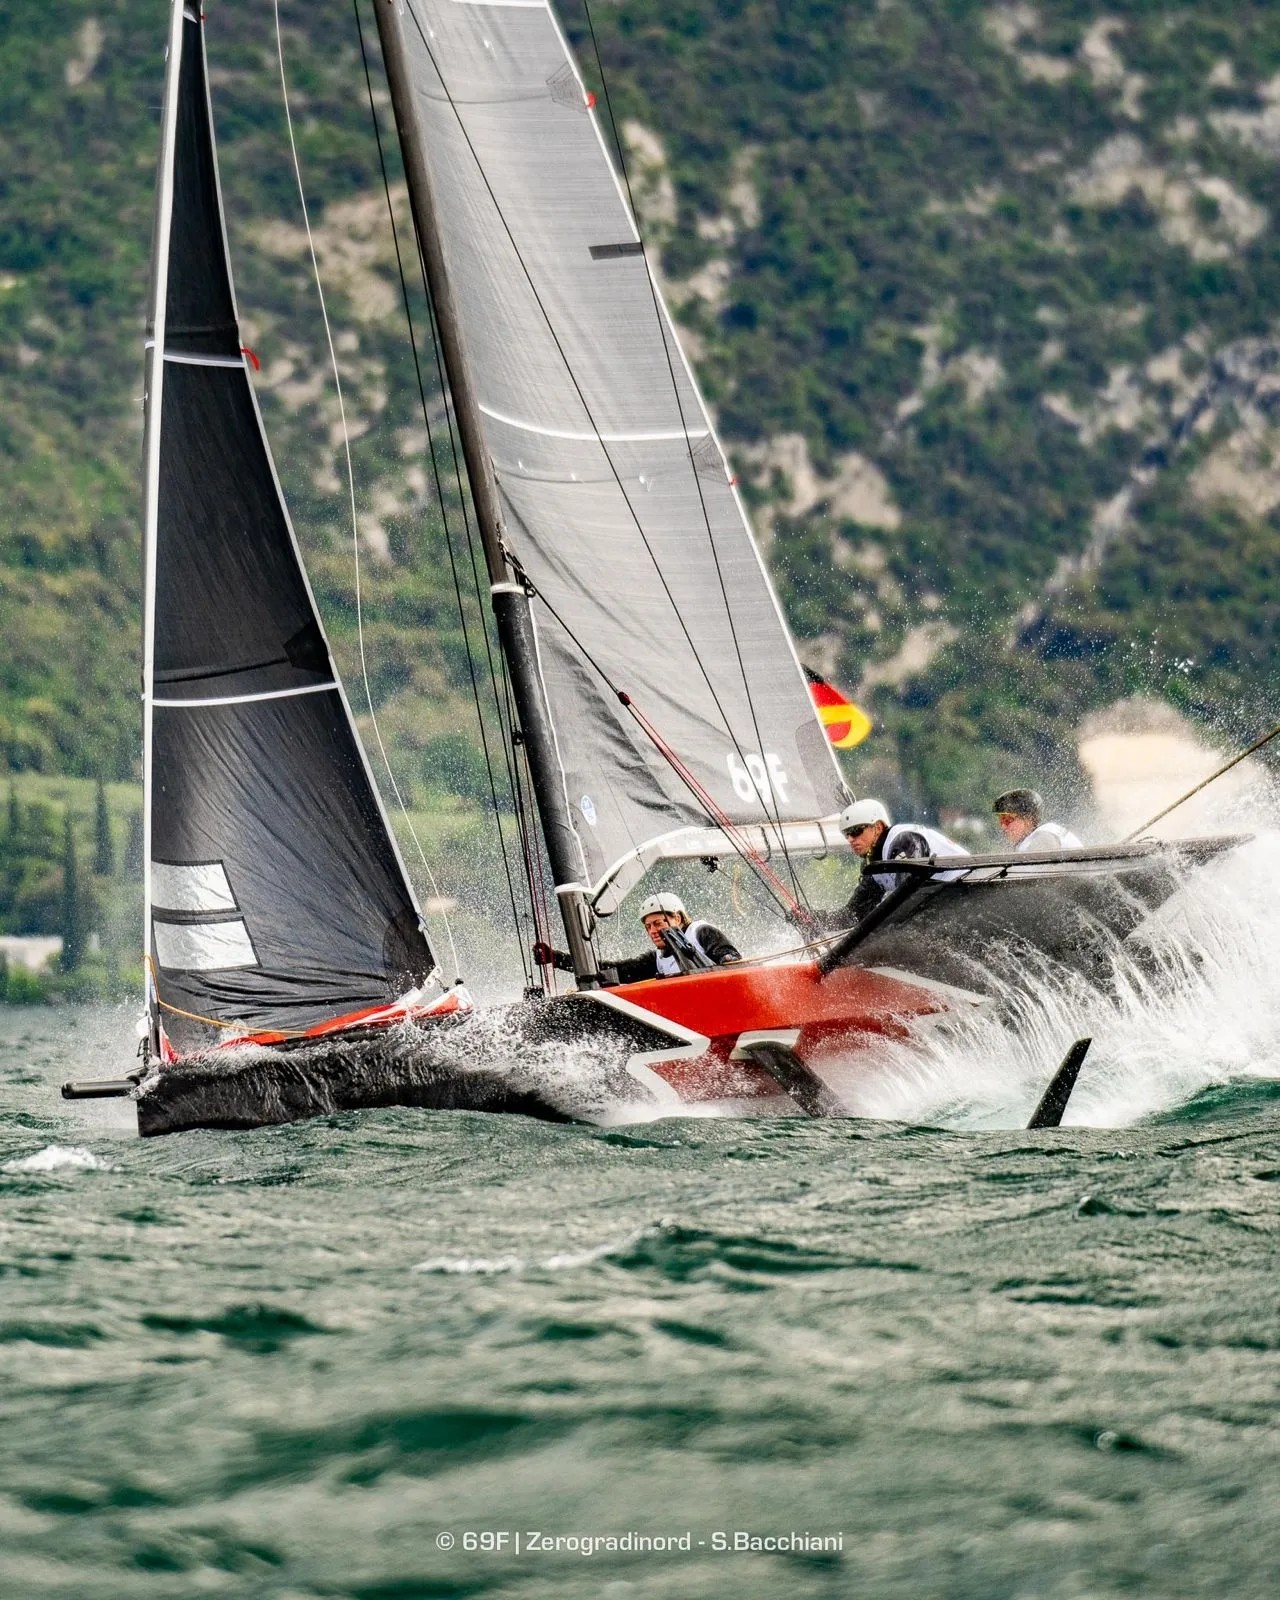  Persico 69F  Youth Gold Cup  Torbole ITA  Day 4